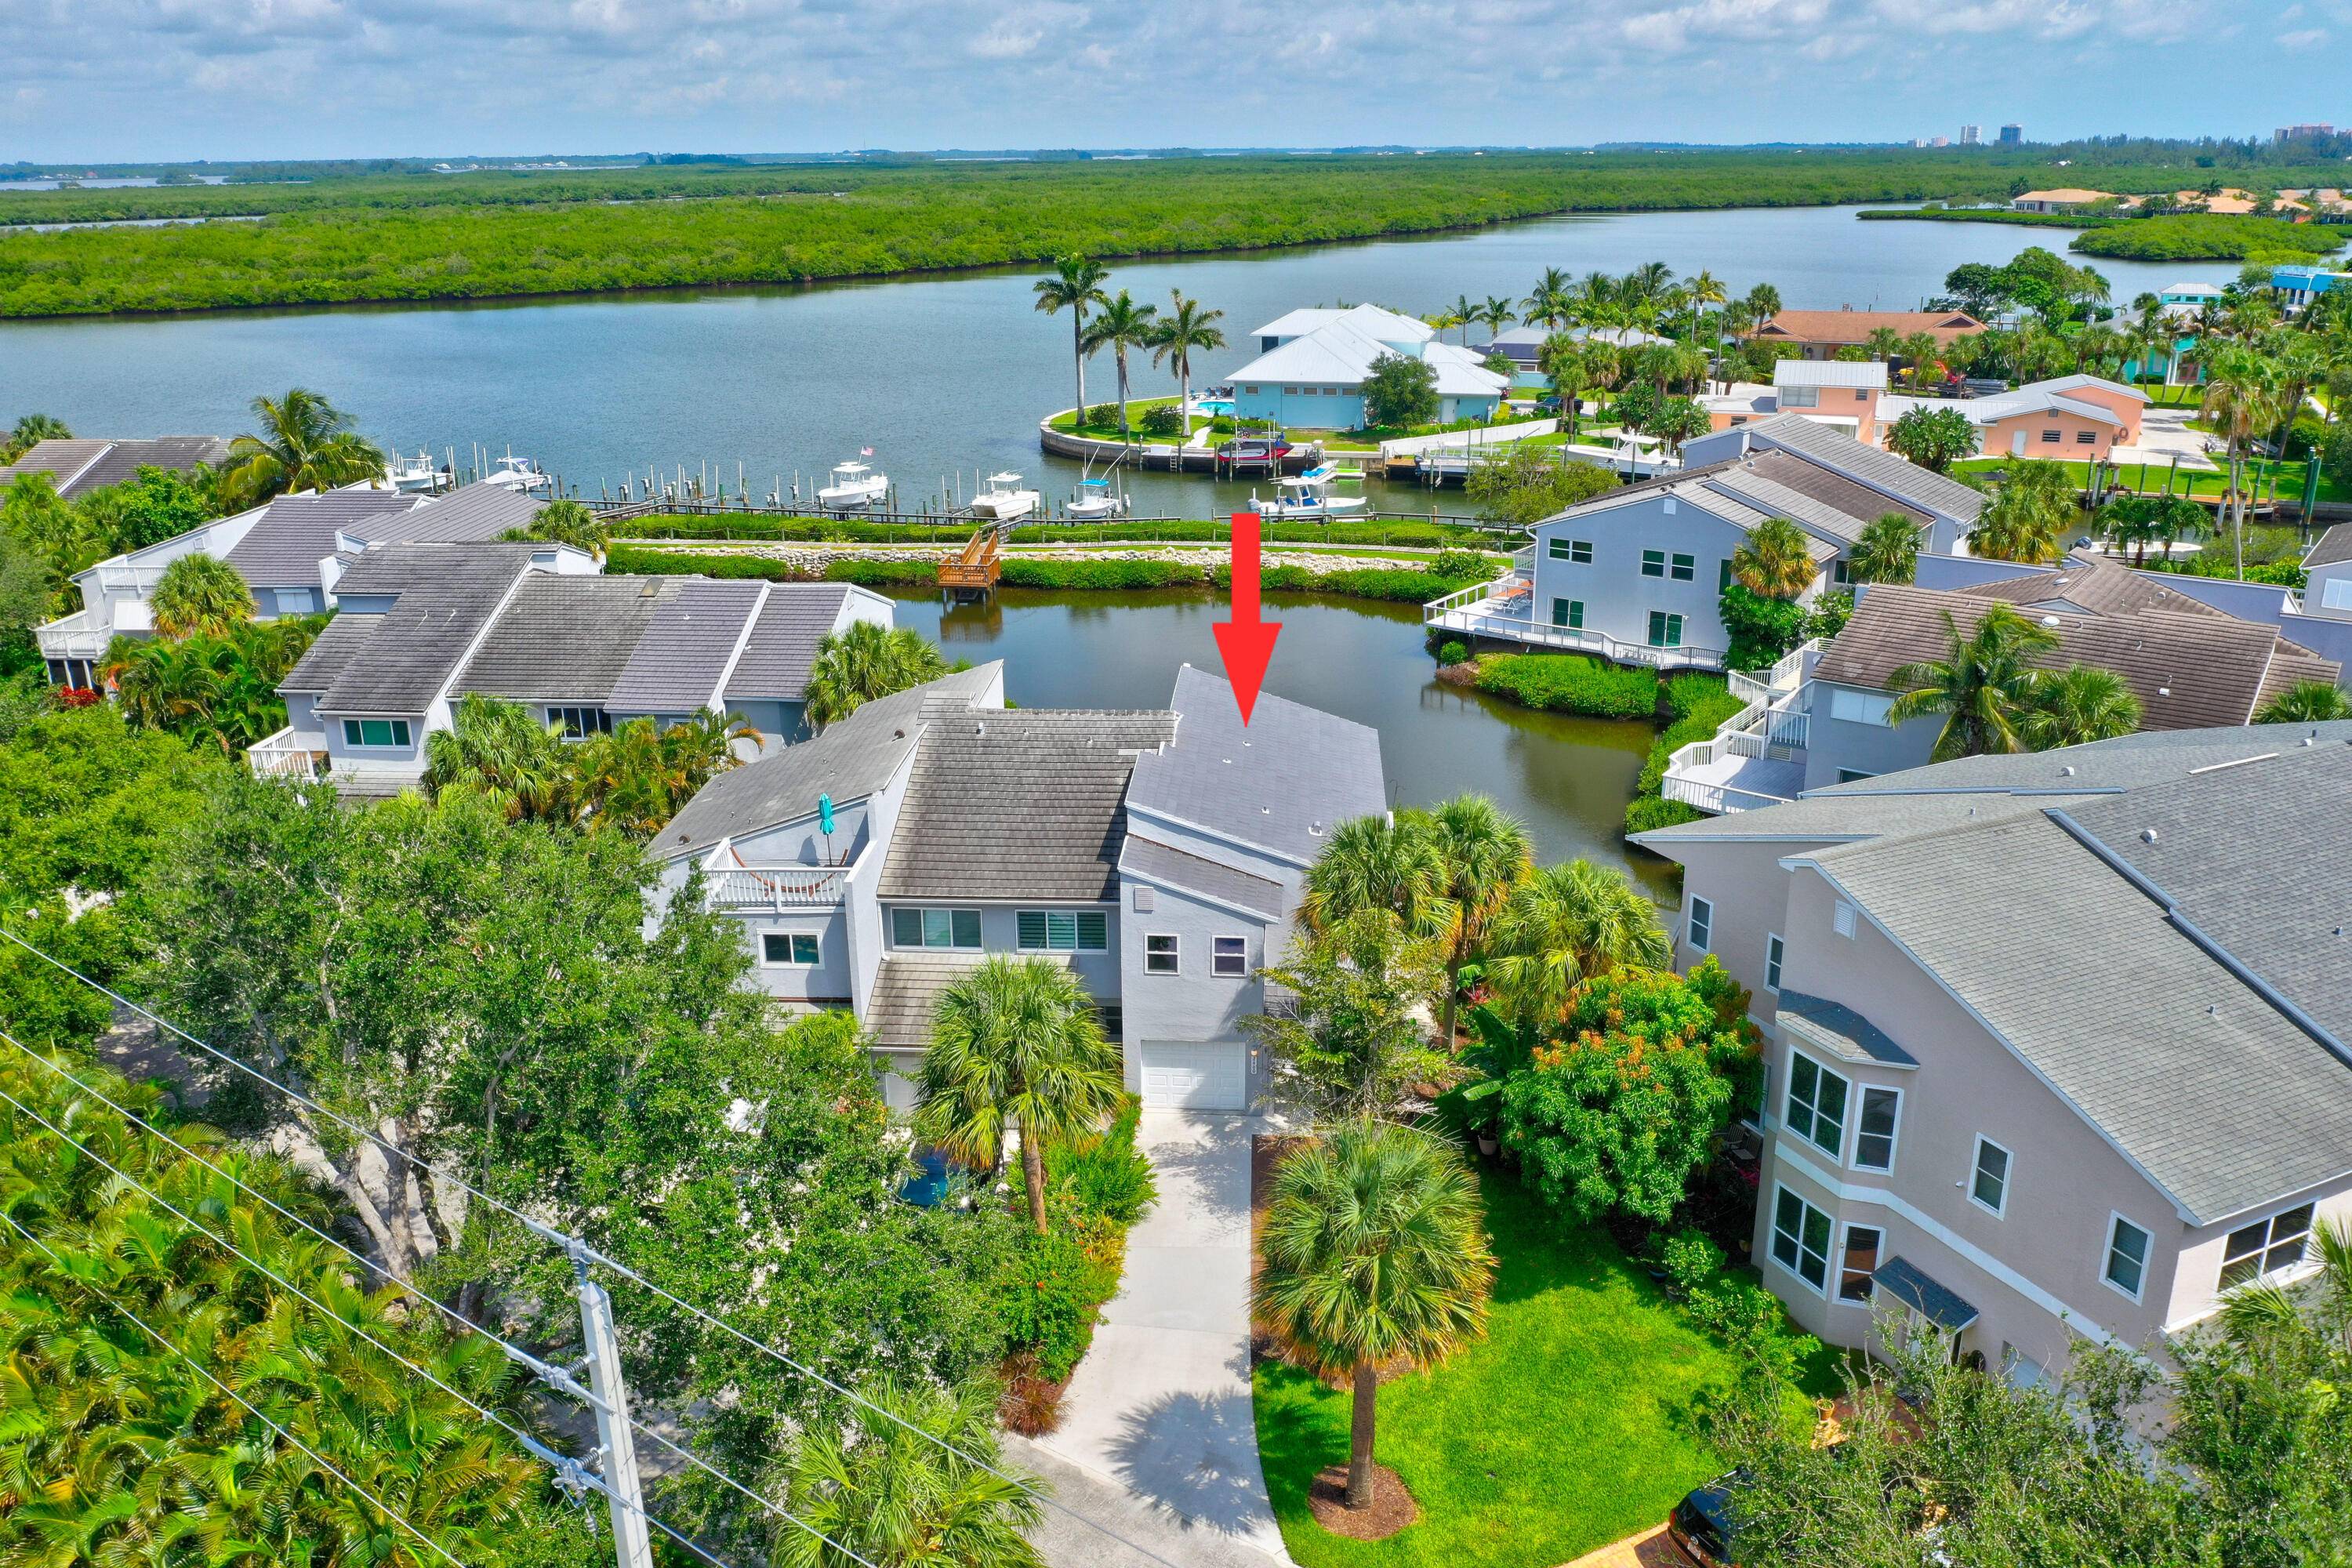 Nestled on the picturesque banks of the Indian River lies this waterfront haven, a true paradise for boating enthusiasts.